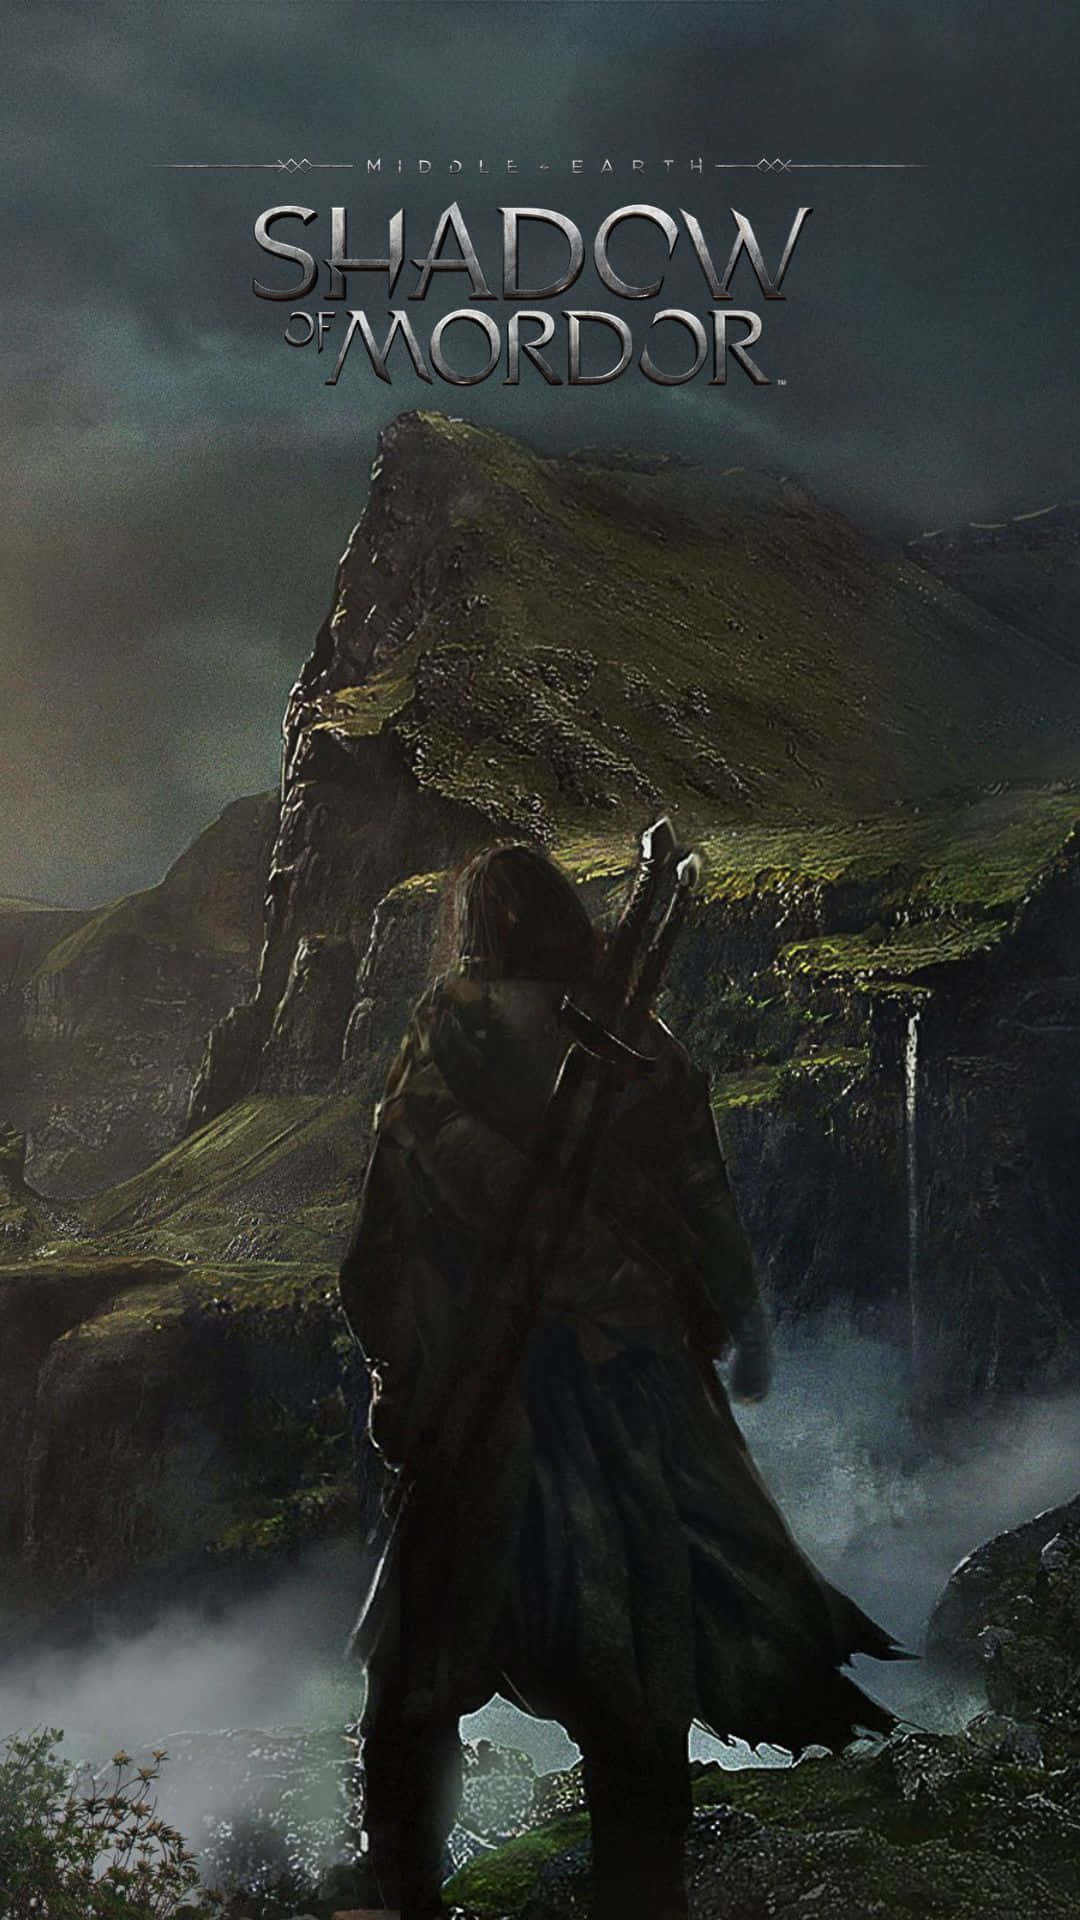 Middle-Earth: Shadow of Mordor Online Features Going Offline This Year